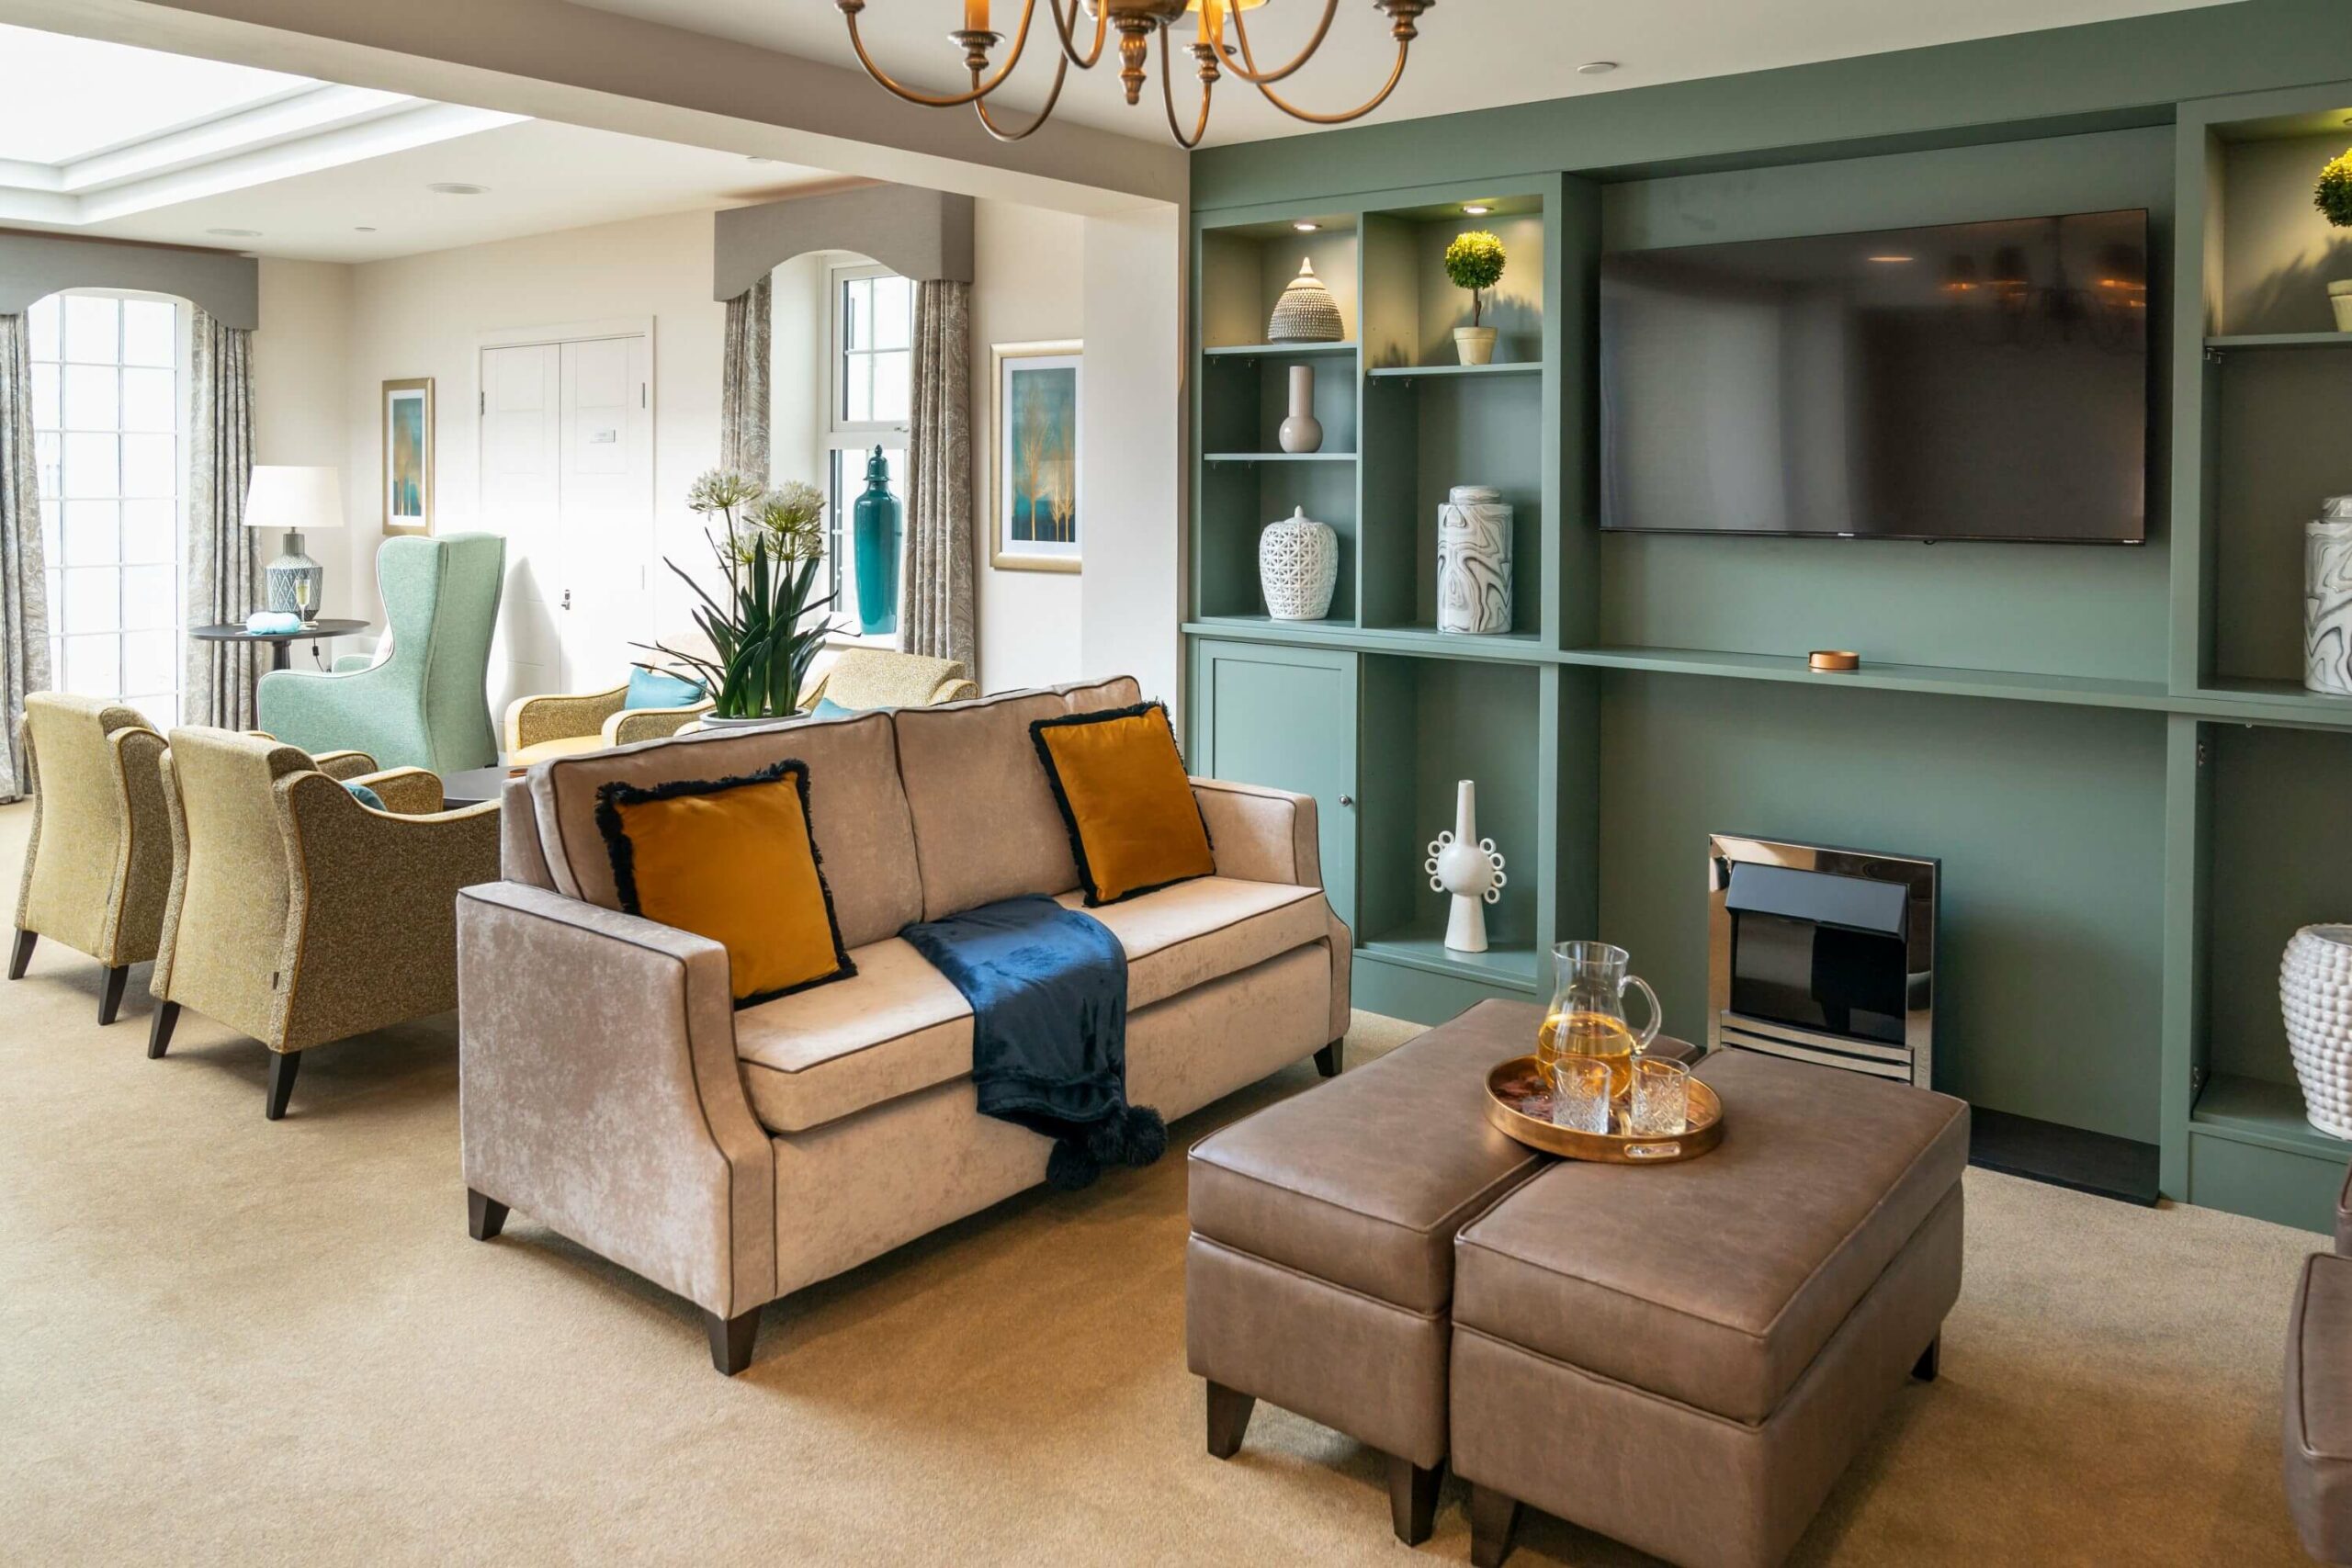 A bright living space at Whitehouse